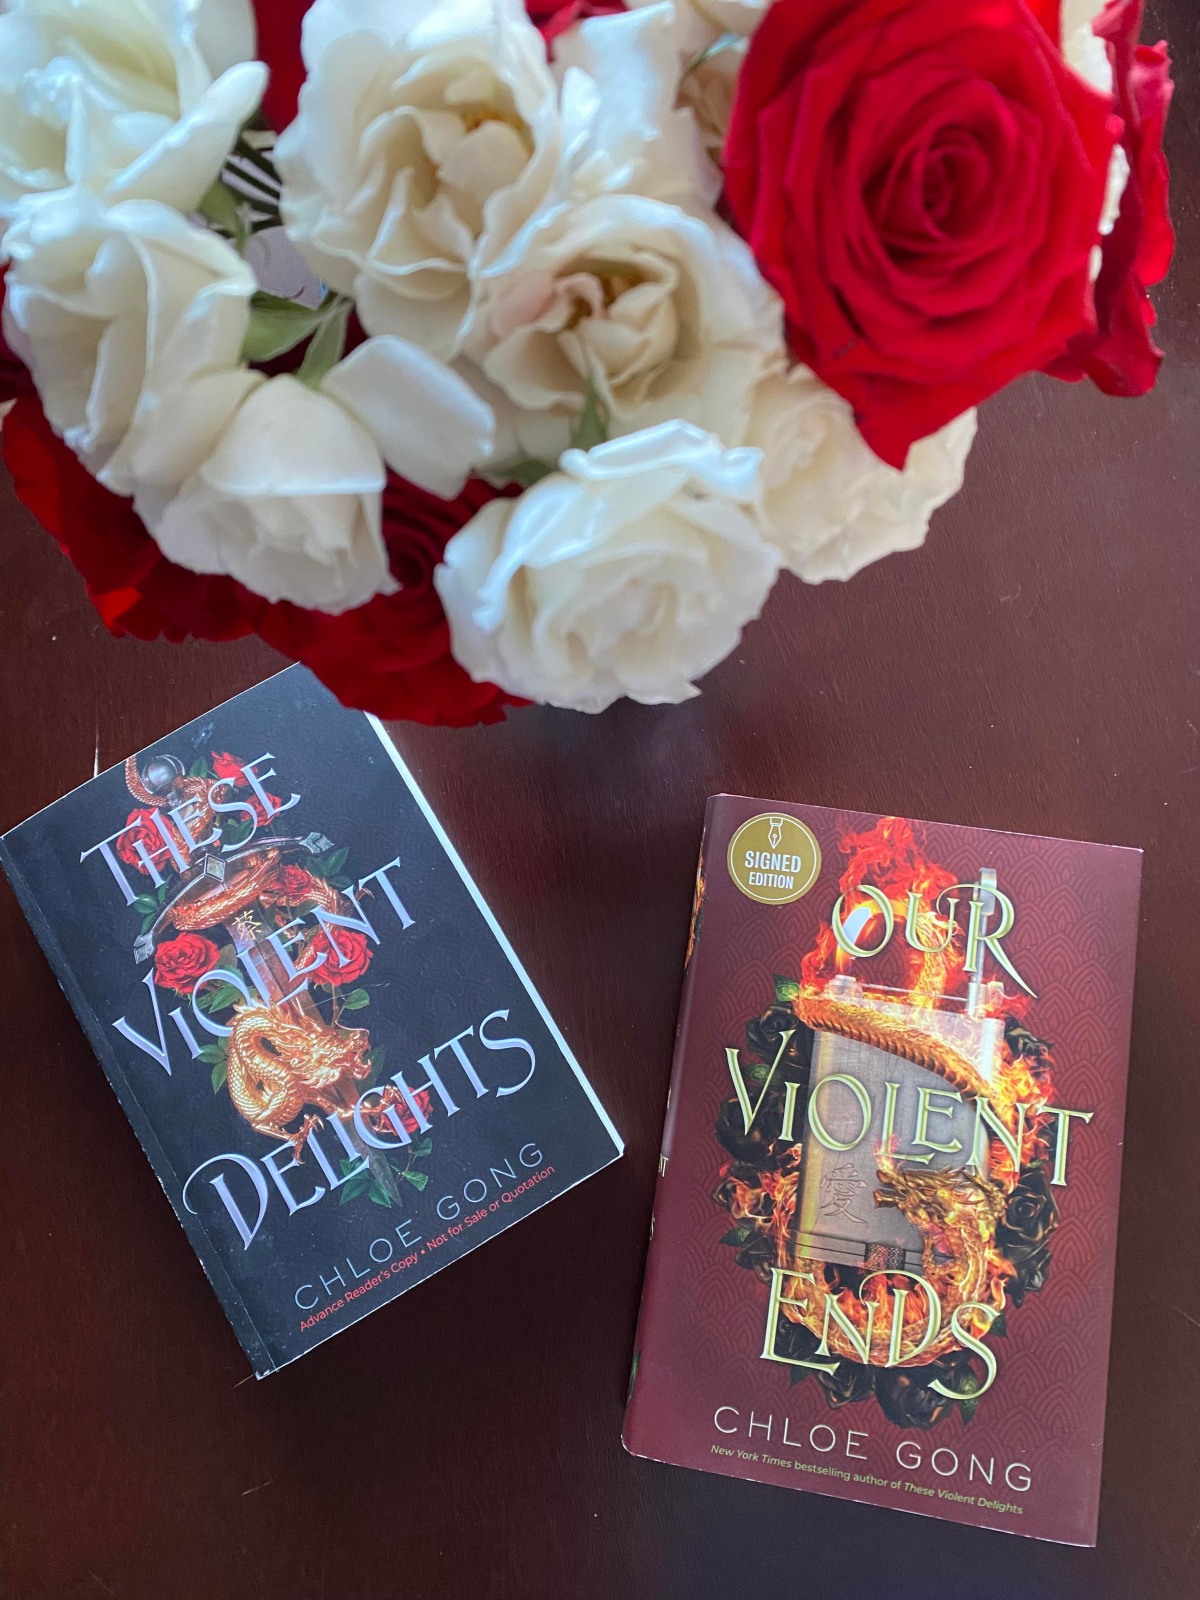 “These Violent Delights” By Chloe Gong